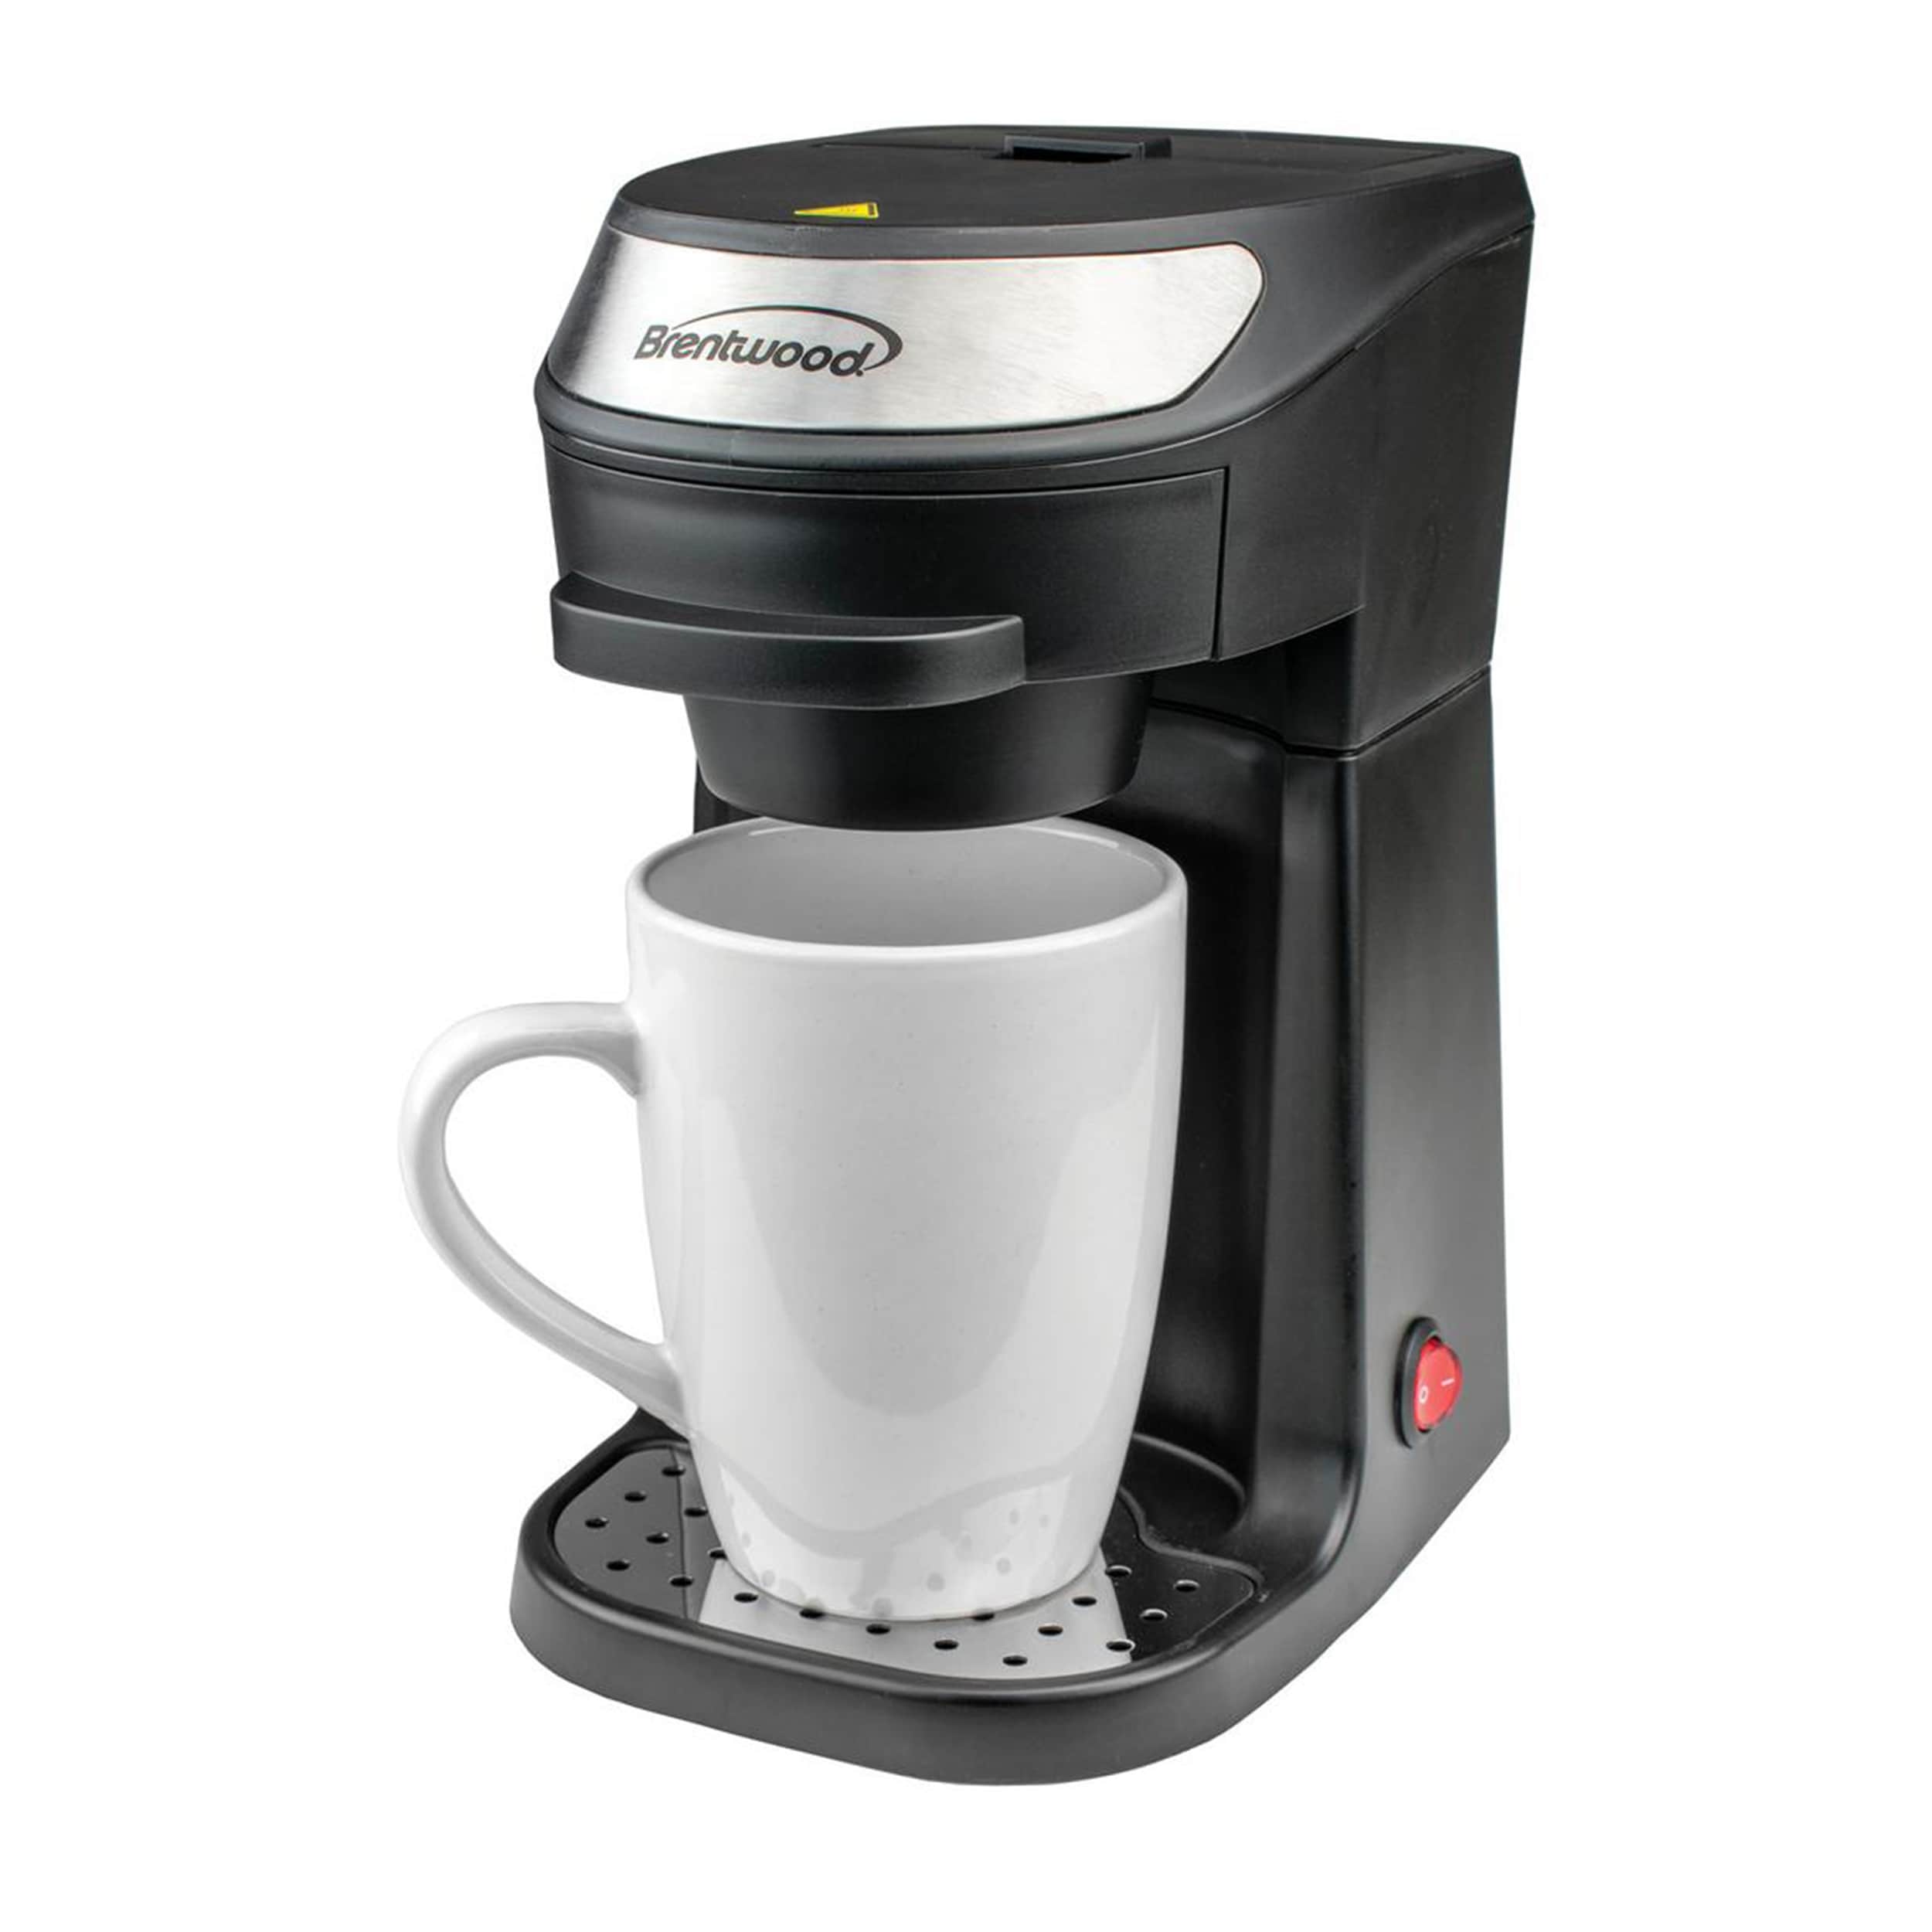 https://ak1.ostkcdn.com/images/products/is/images/direct/ce8b43bac10a8c73eba10744956ec4586a170728/Brentwood-Single-Serve-Coffee-Maker-in-Black-with-Mug.jpg